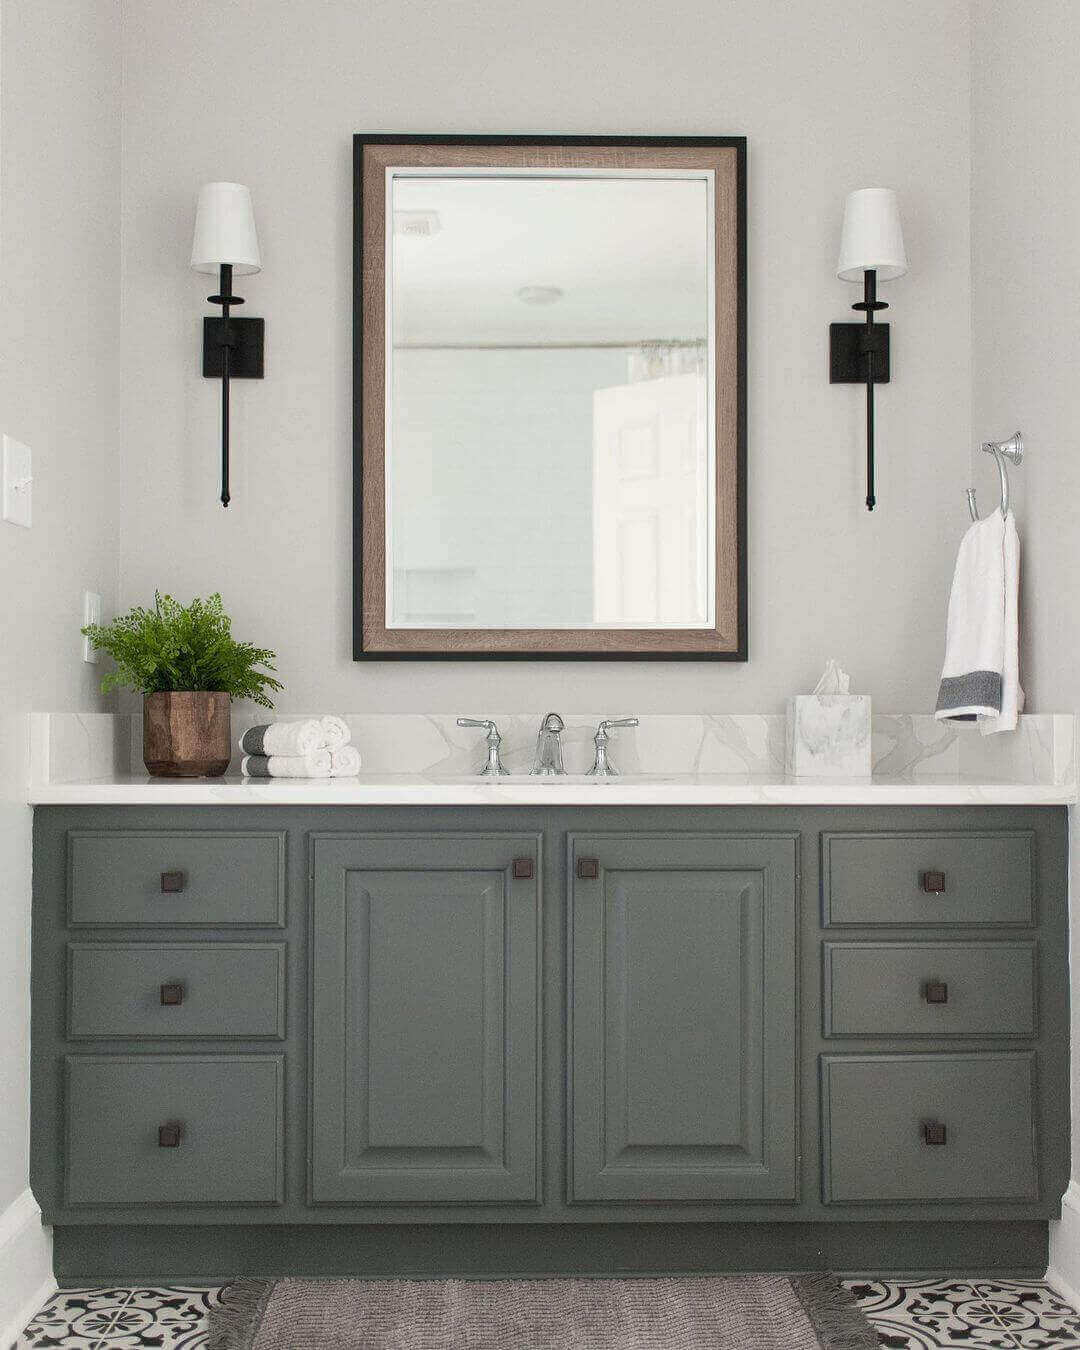 Bathroom sconces with shades.  Two sconces installed on either side of a single bathroom mirror.